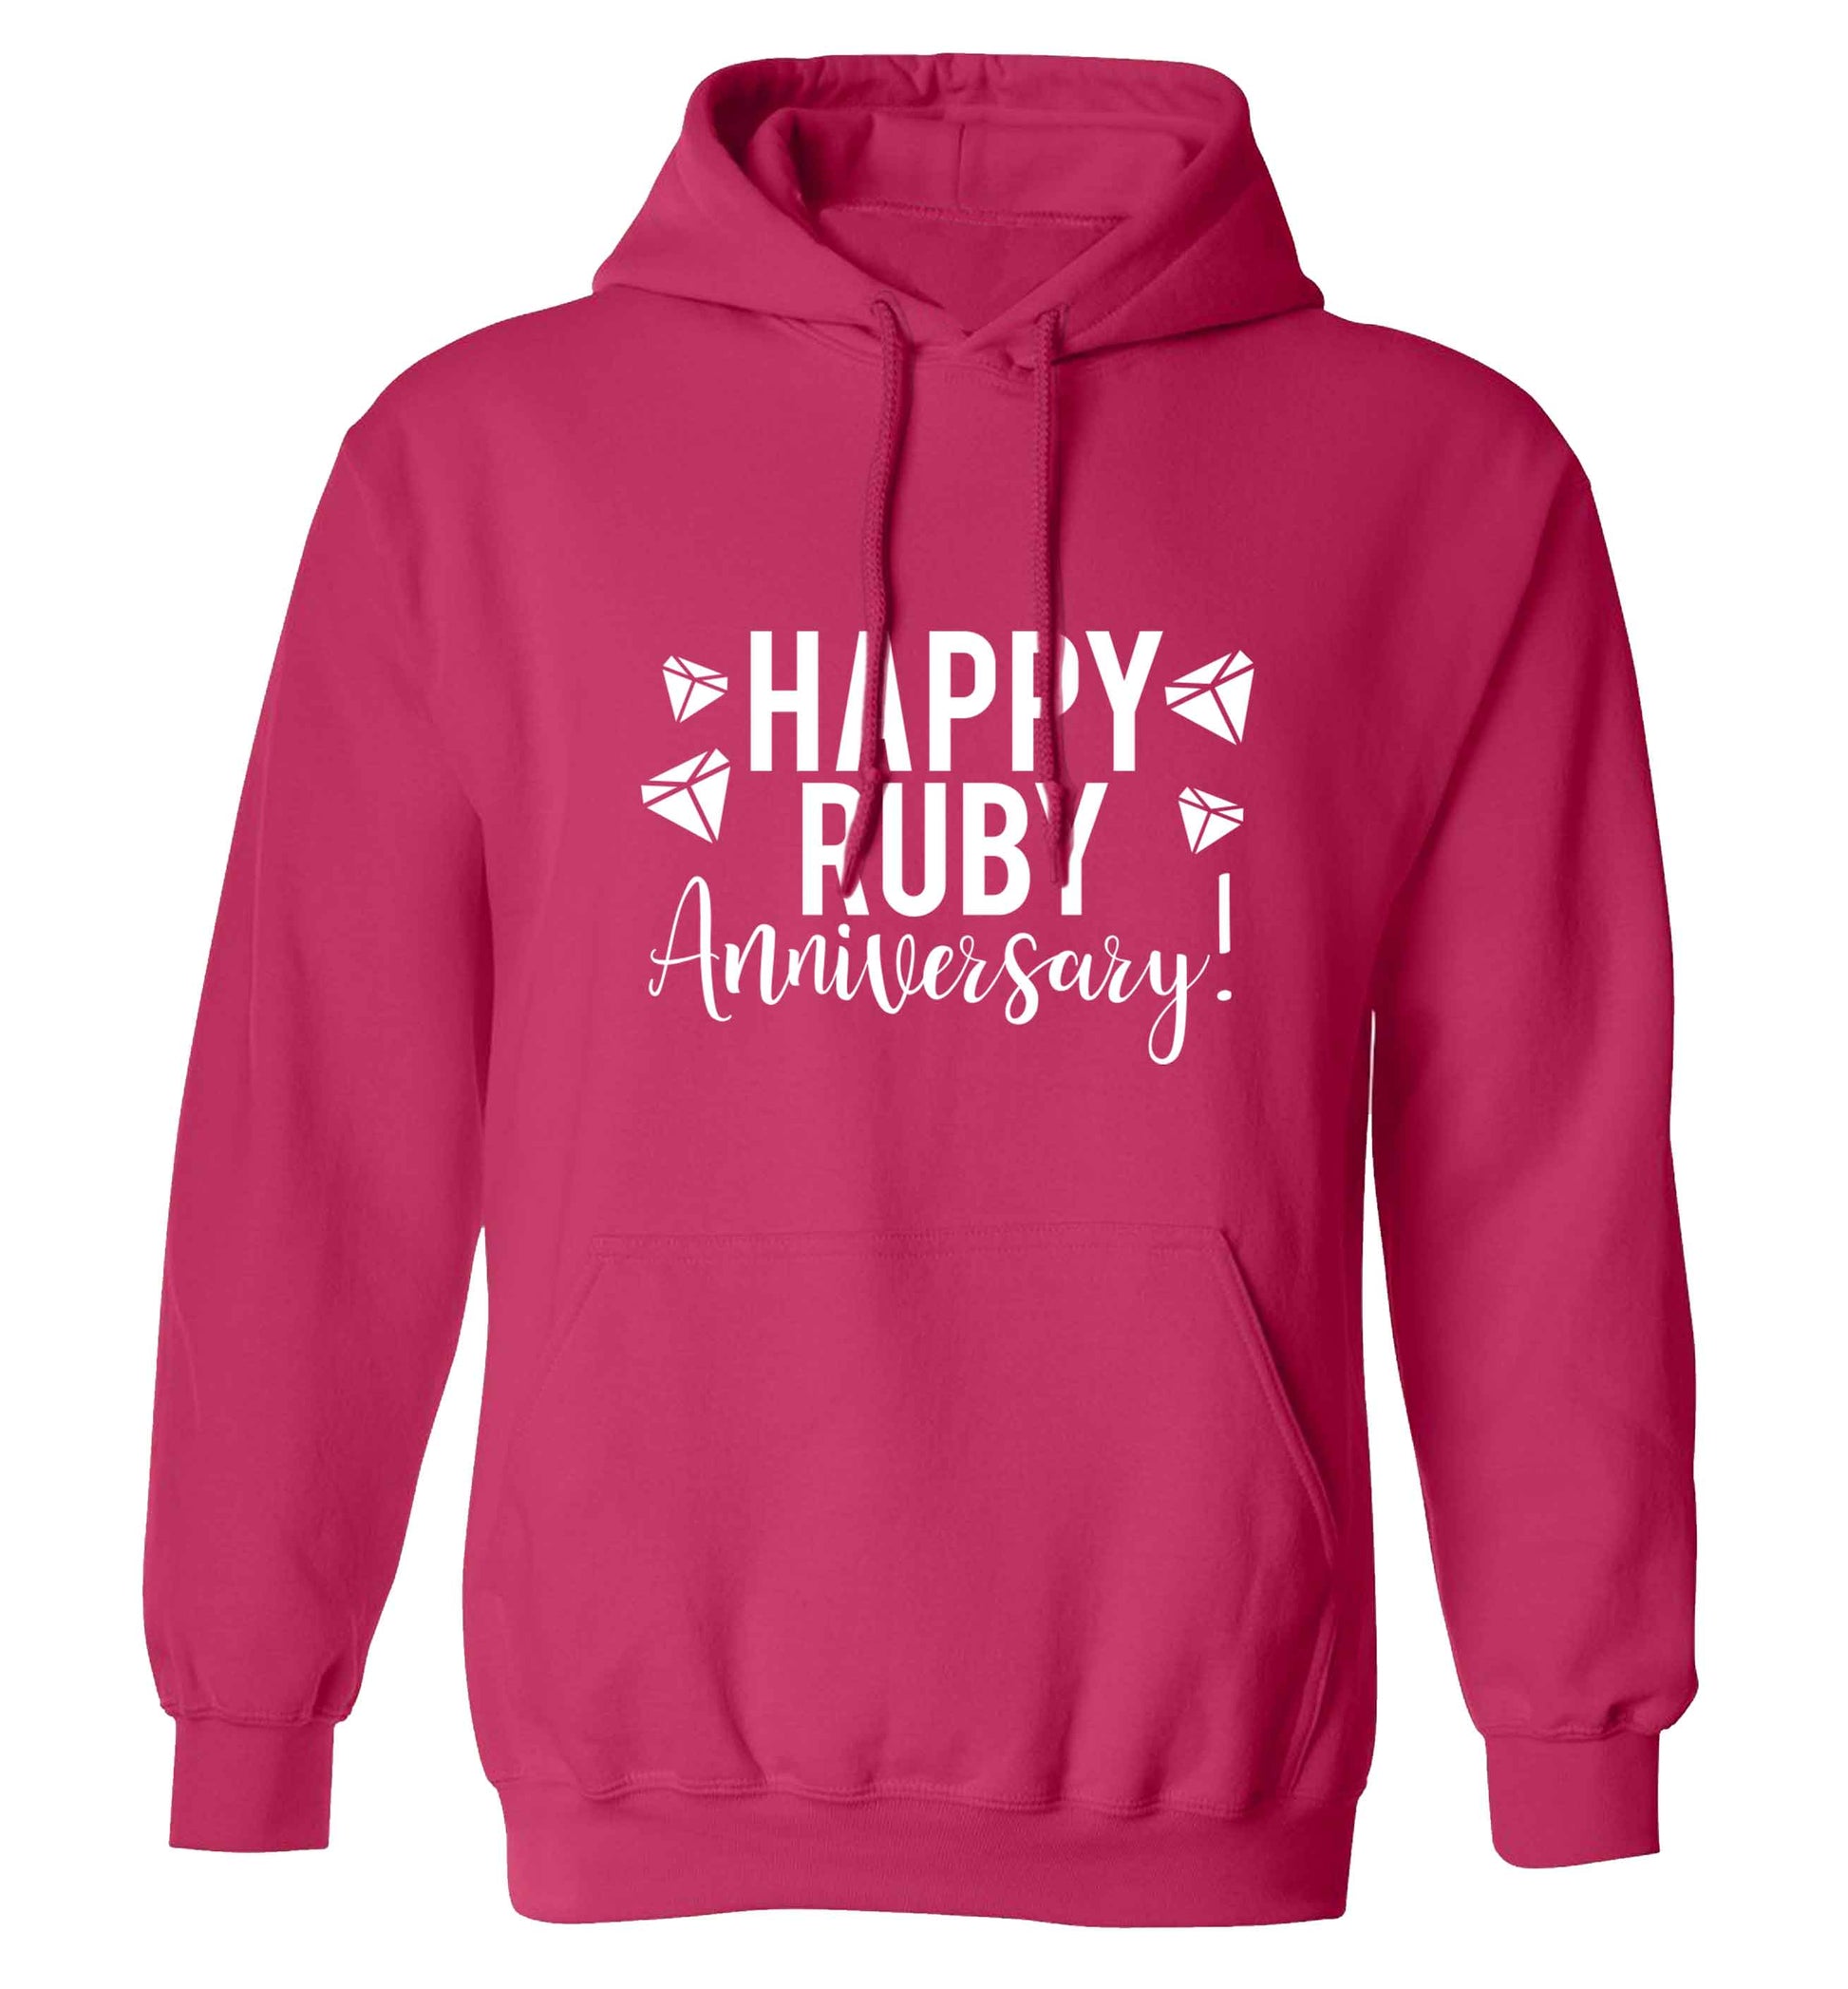 Happy ruby anniversary! adults unisex pink hoodie 2XL